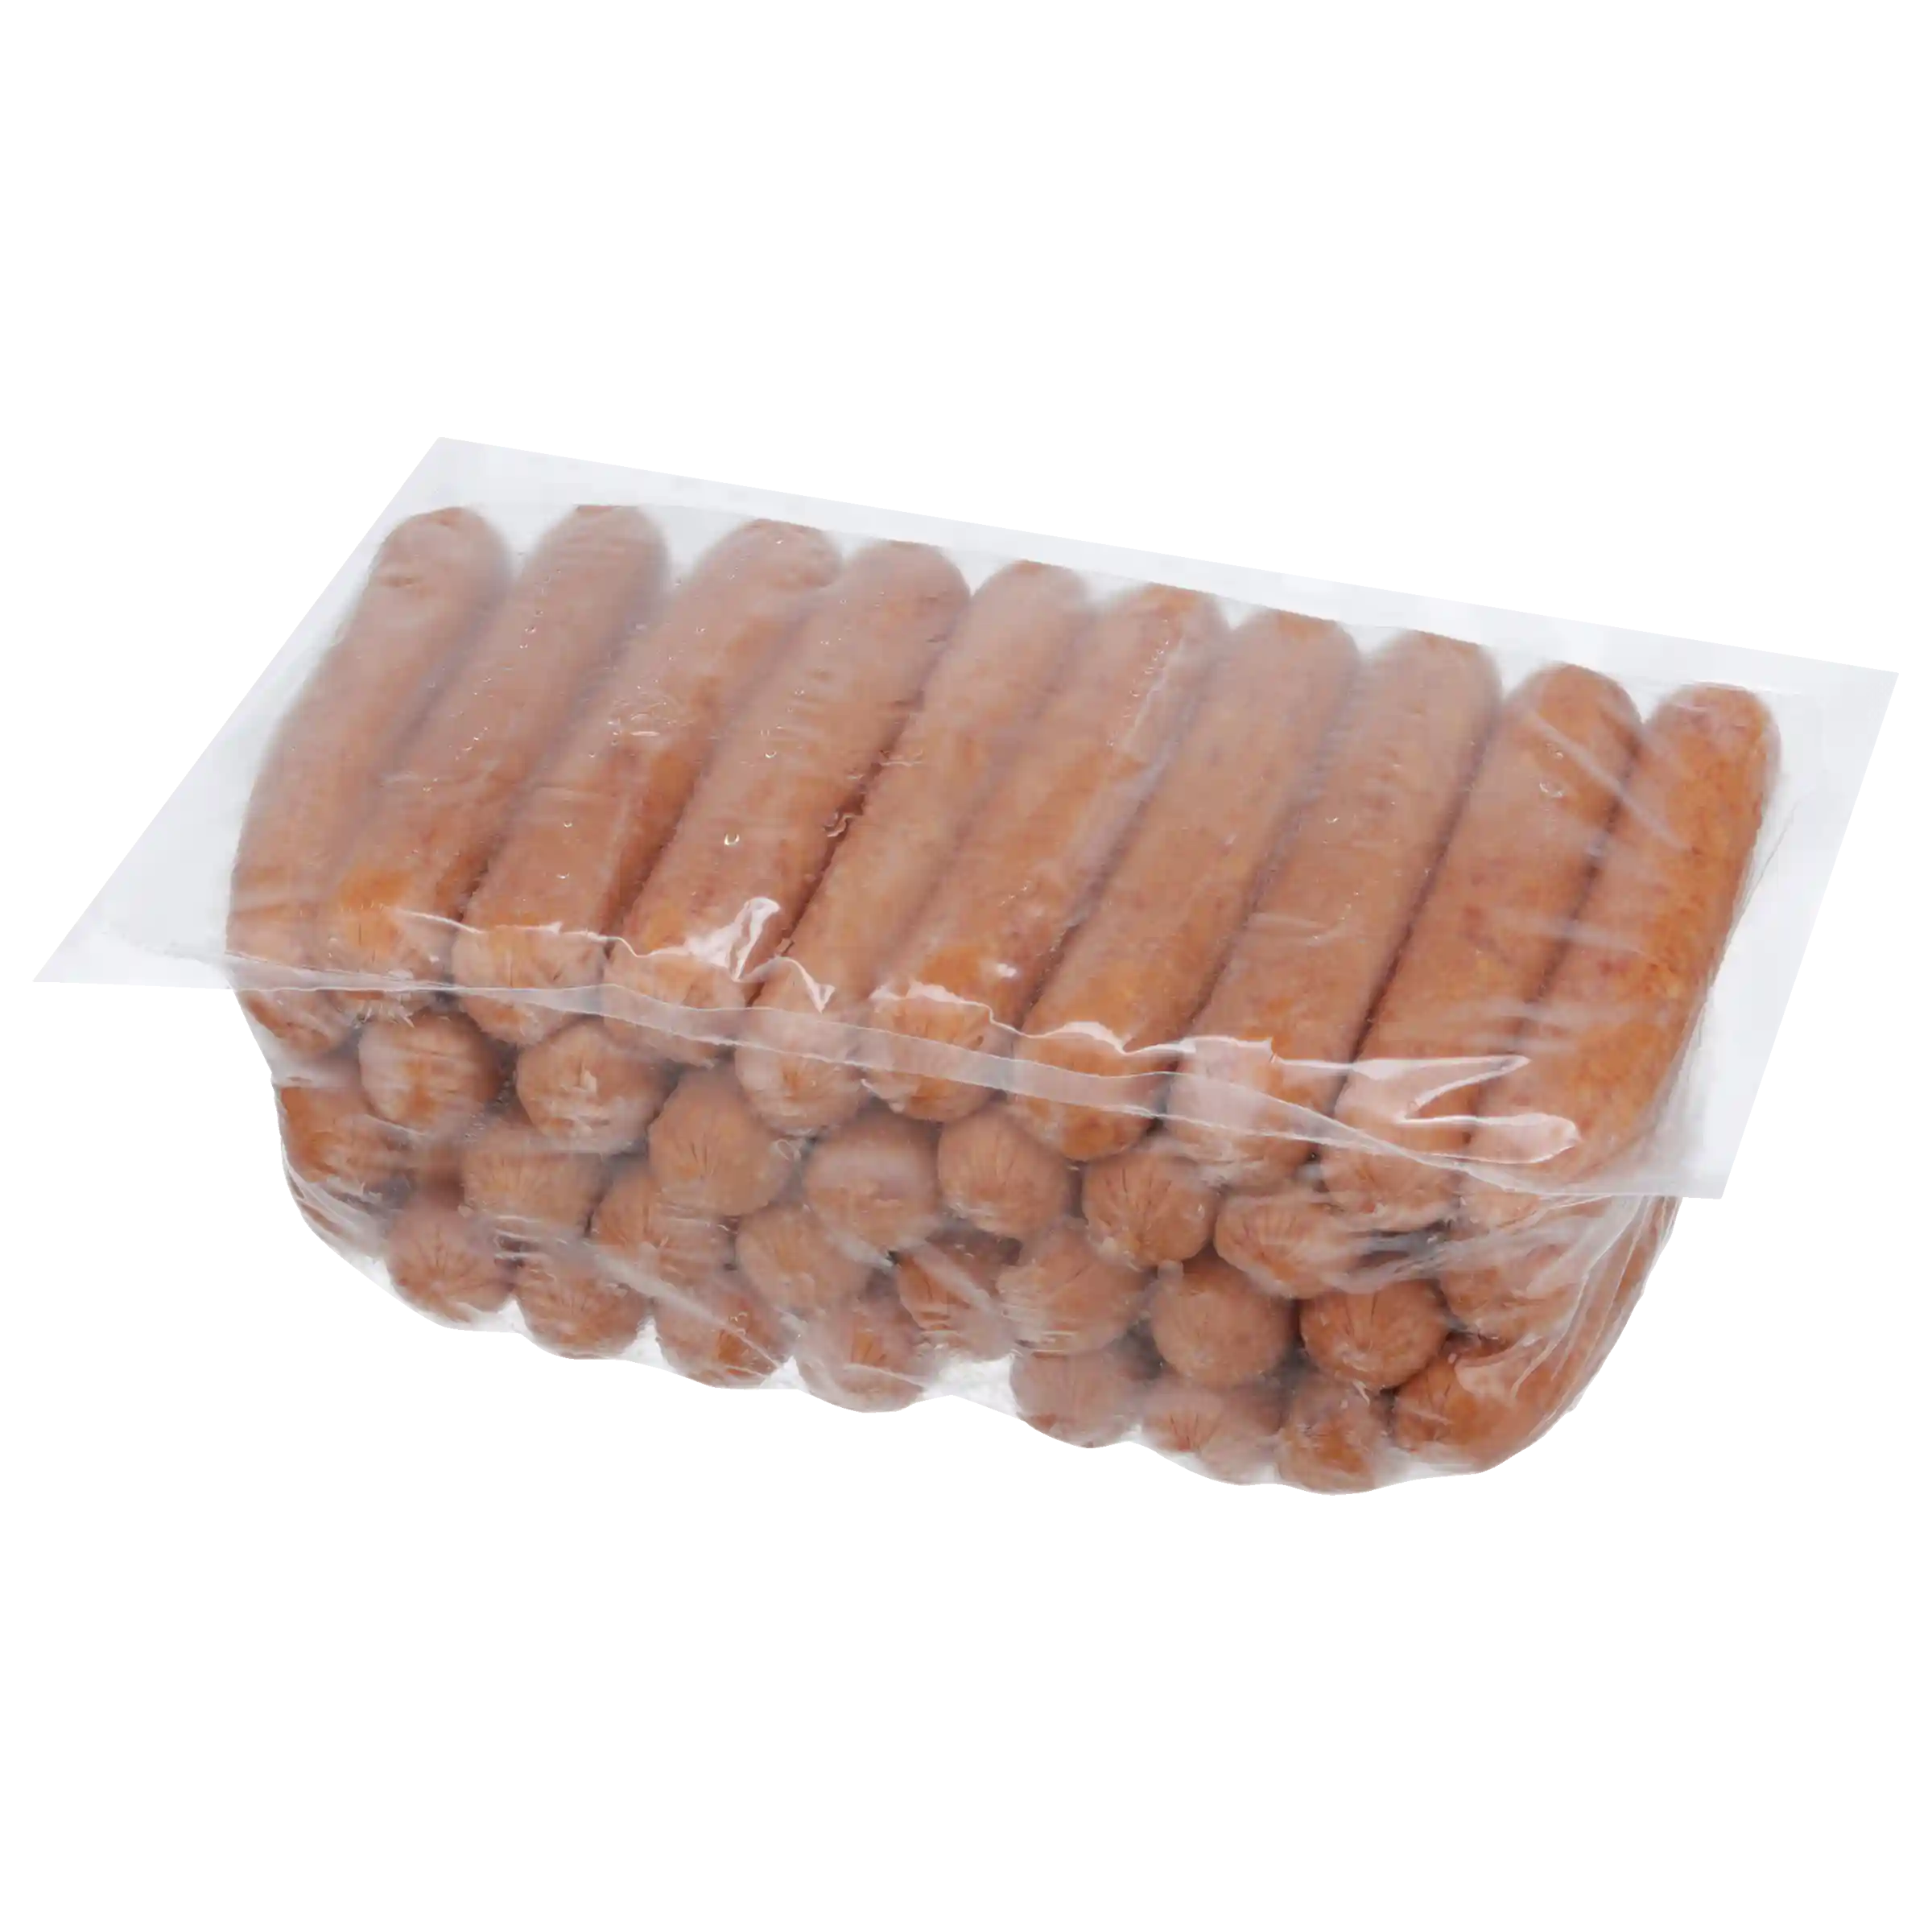 Hillshire Farm® Cheddarwurst® Fully Cooked Polish Skinless Dinner Sausage Links, 6:1 Links Per Lb, 6 Inch, Frozen_image_21